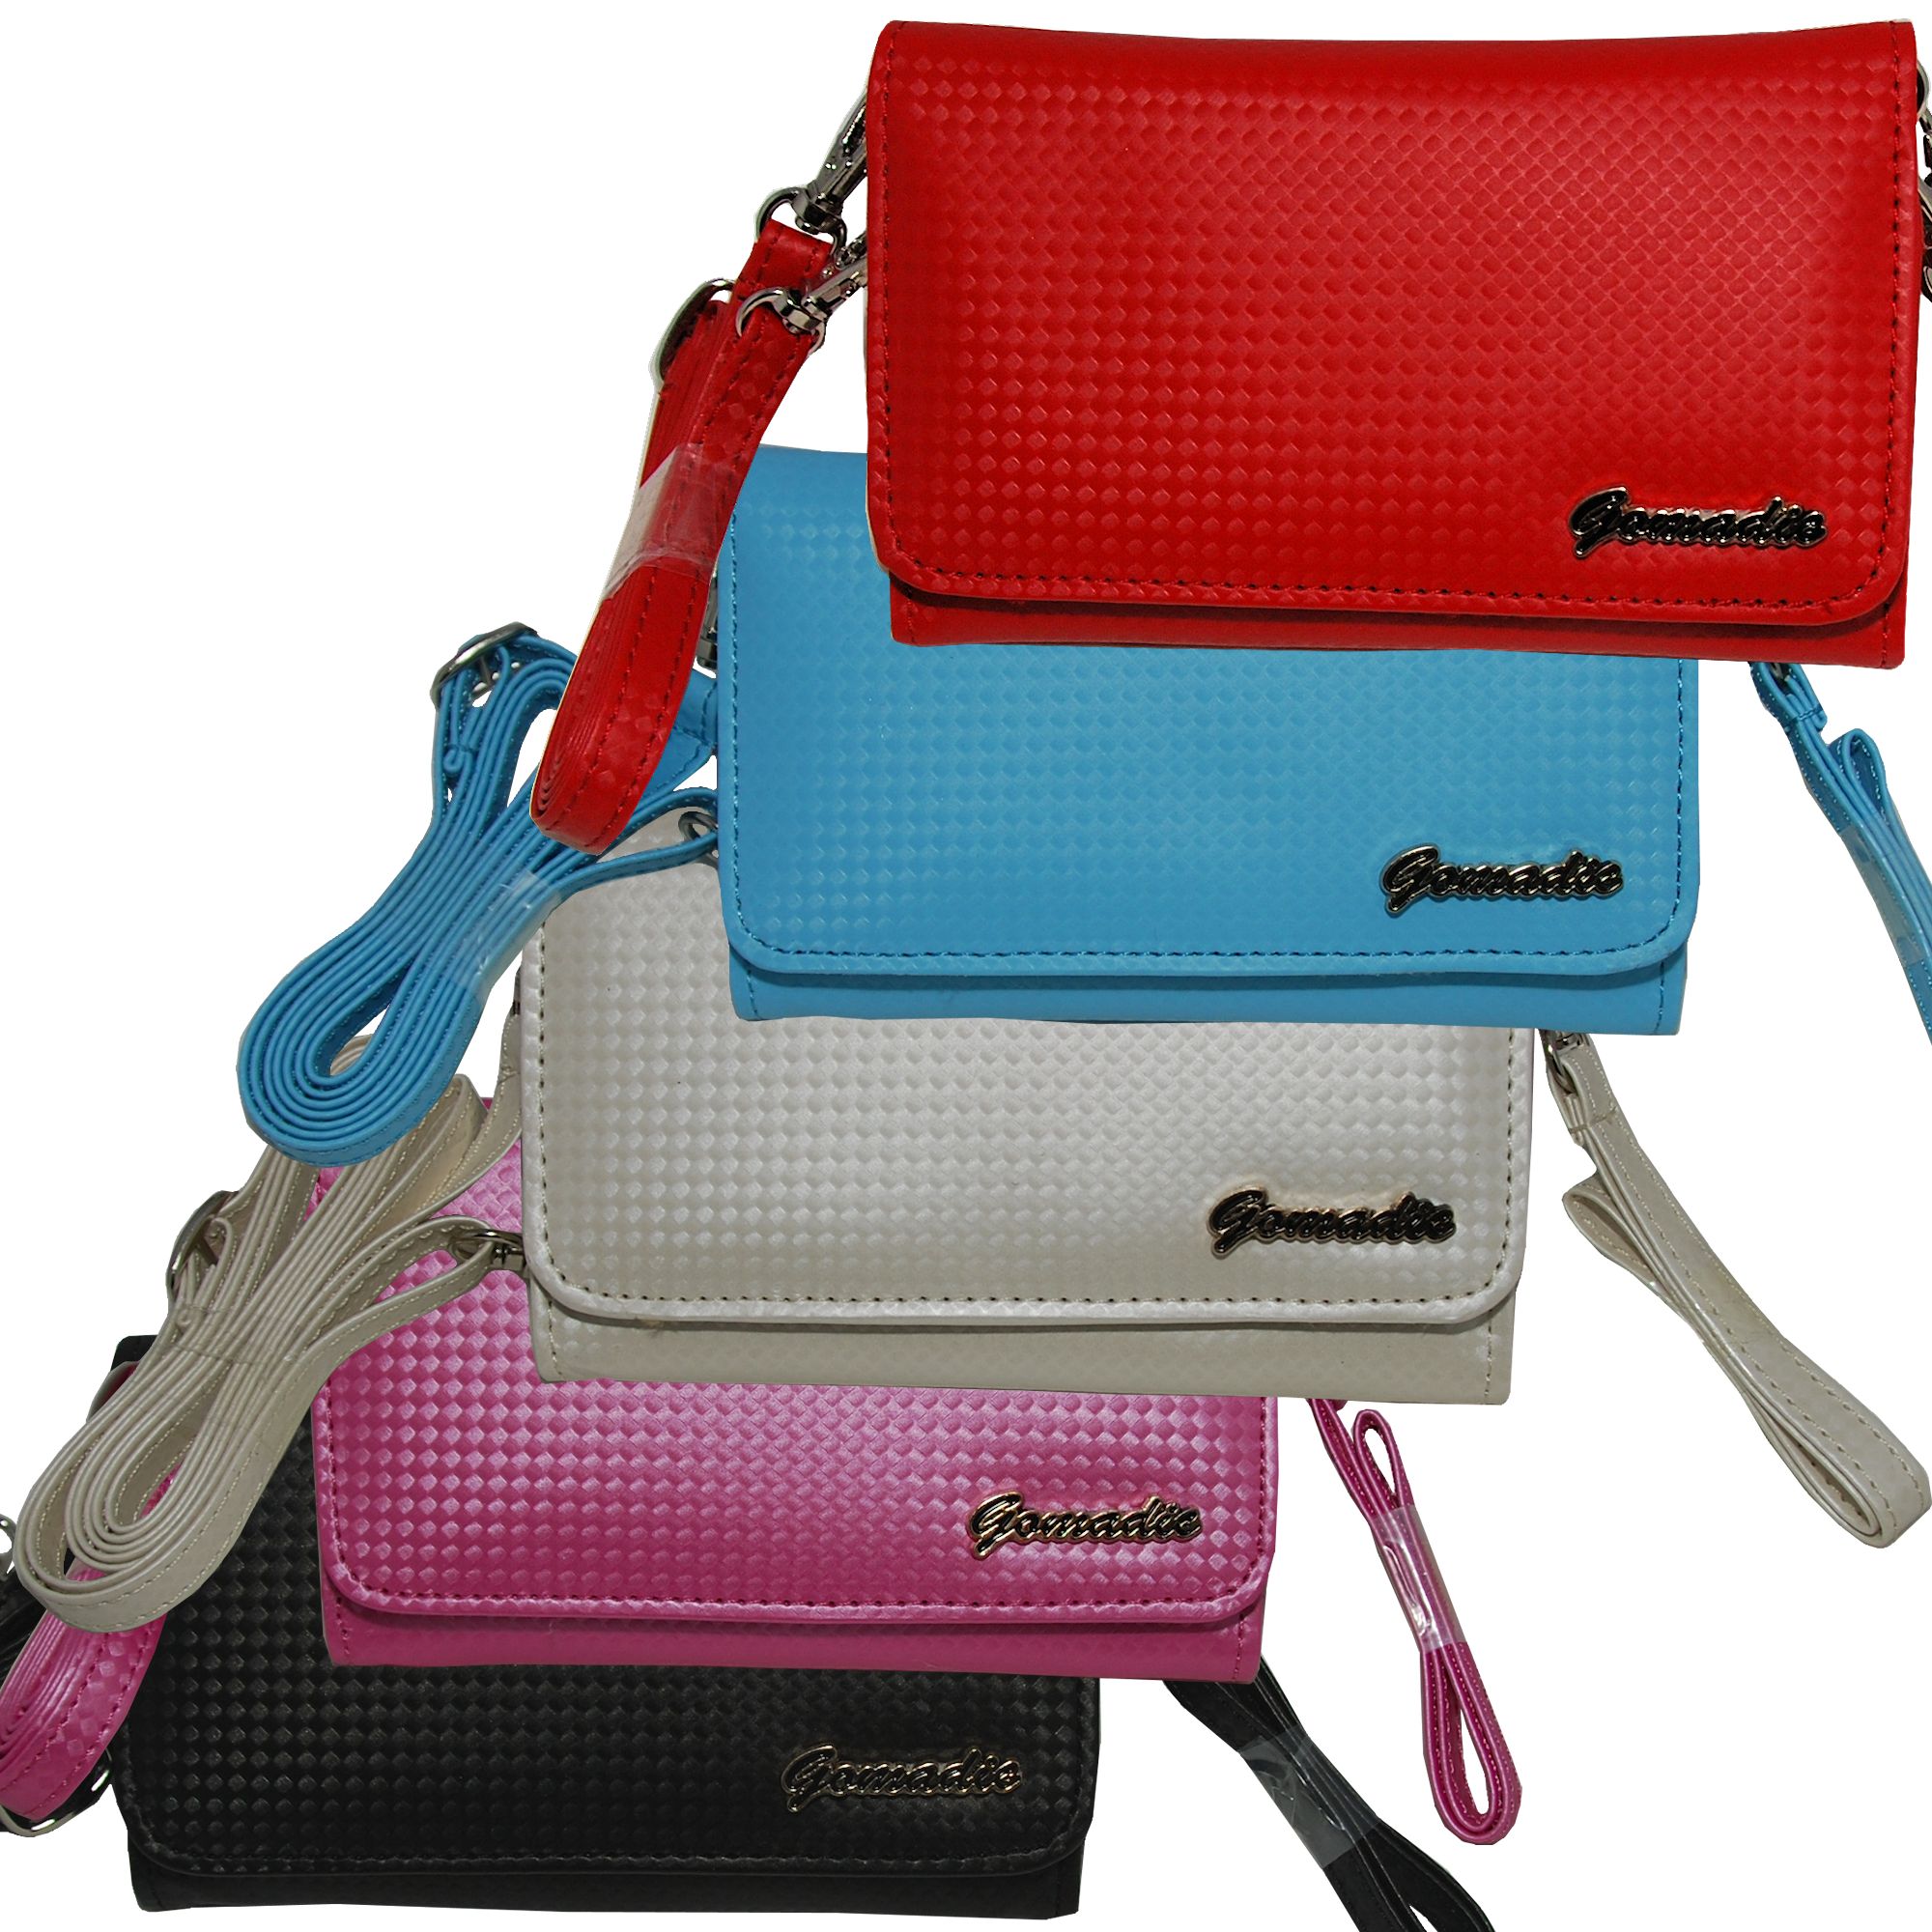 Purse Handbag Case for the Nokia 2630 2660 2680  - Color Options Blue Pink White Black and Red